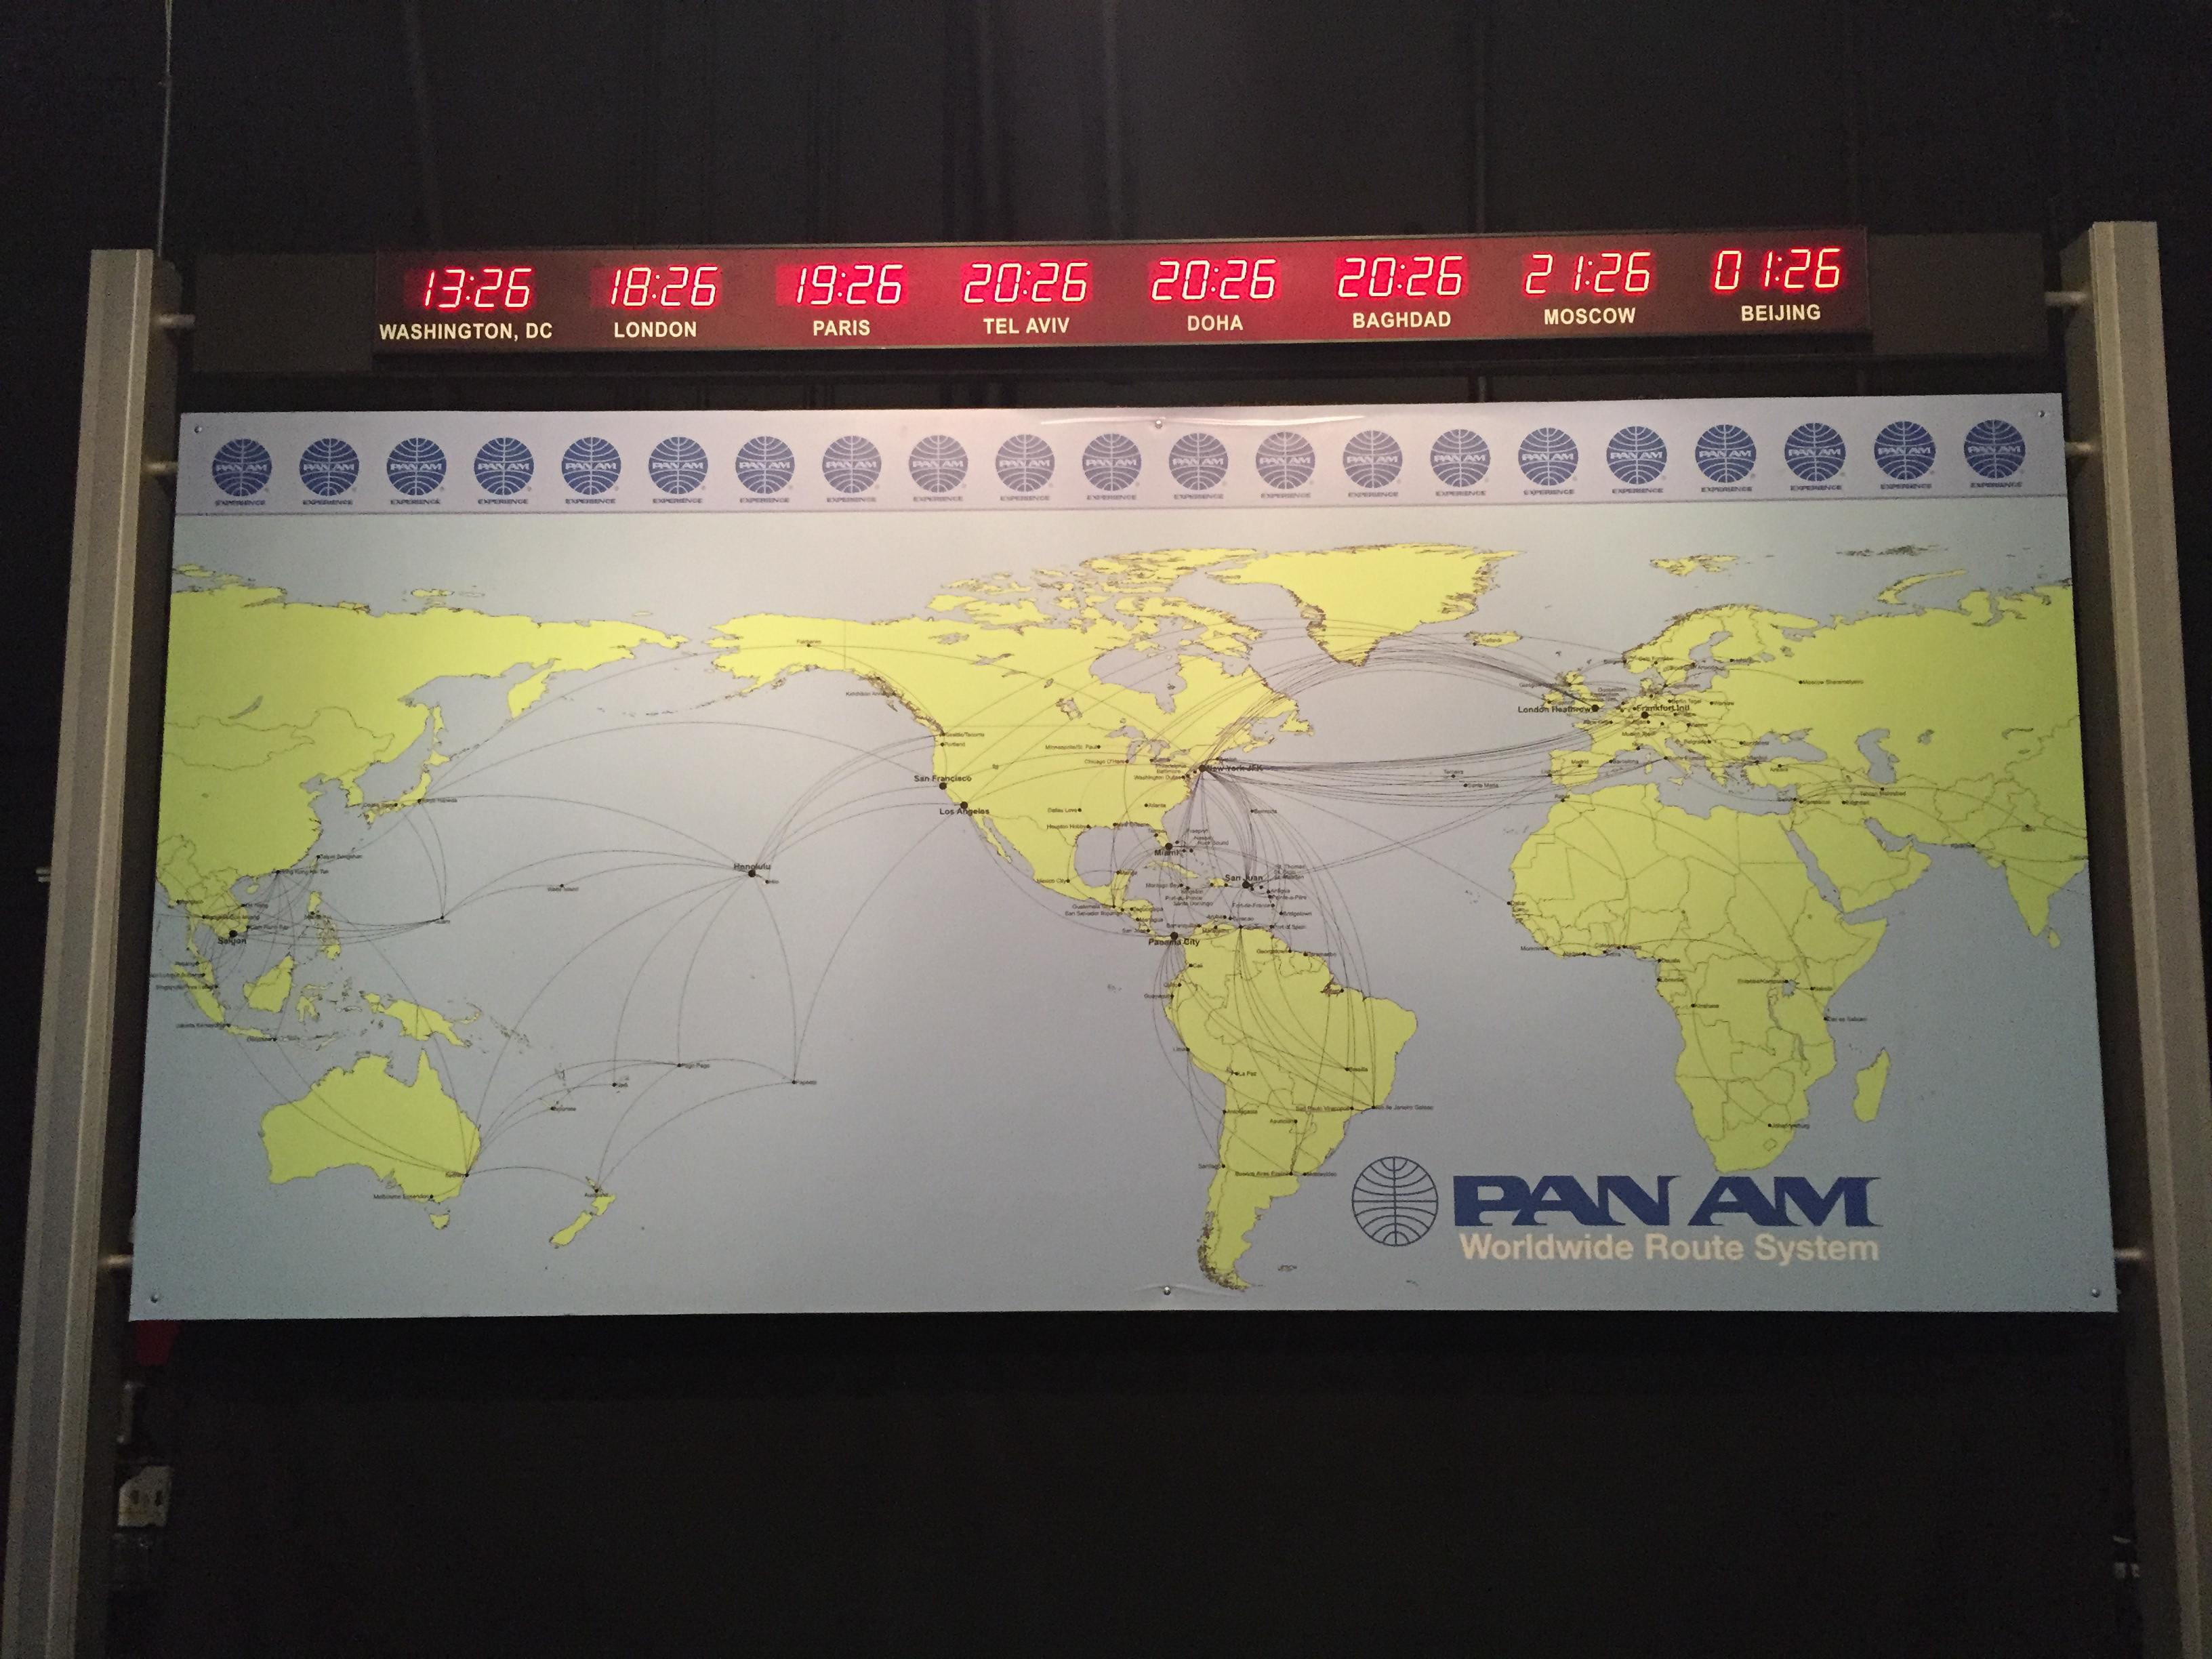 The World’s Most Experienced Airline – The Pan Am Experience